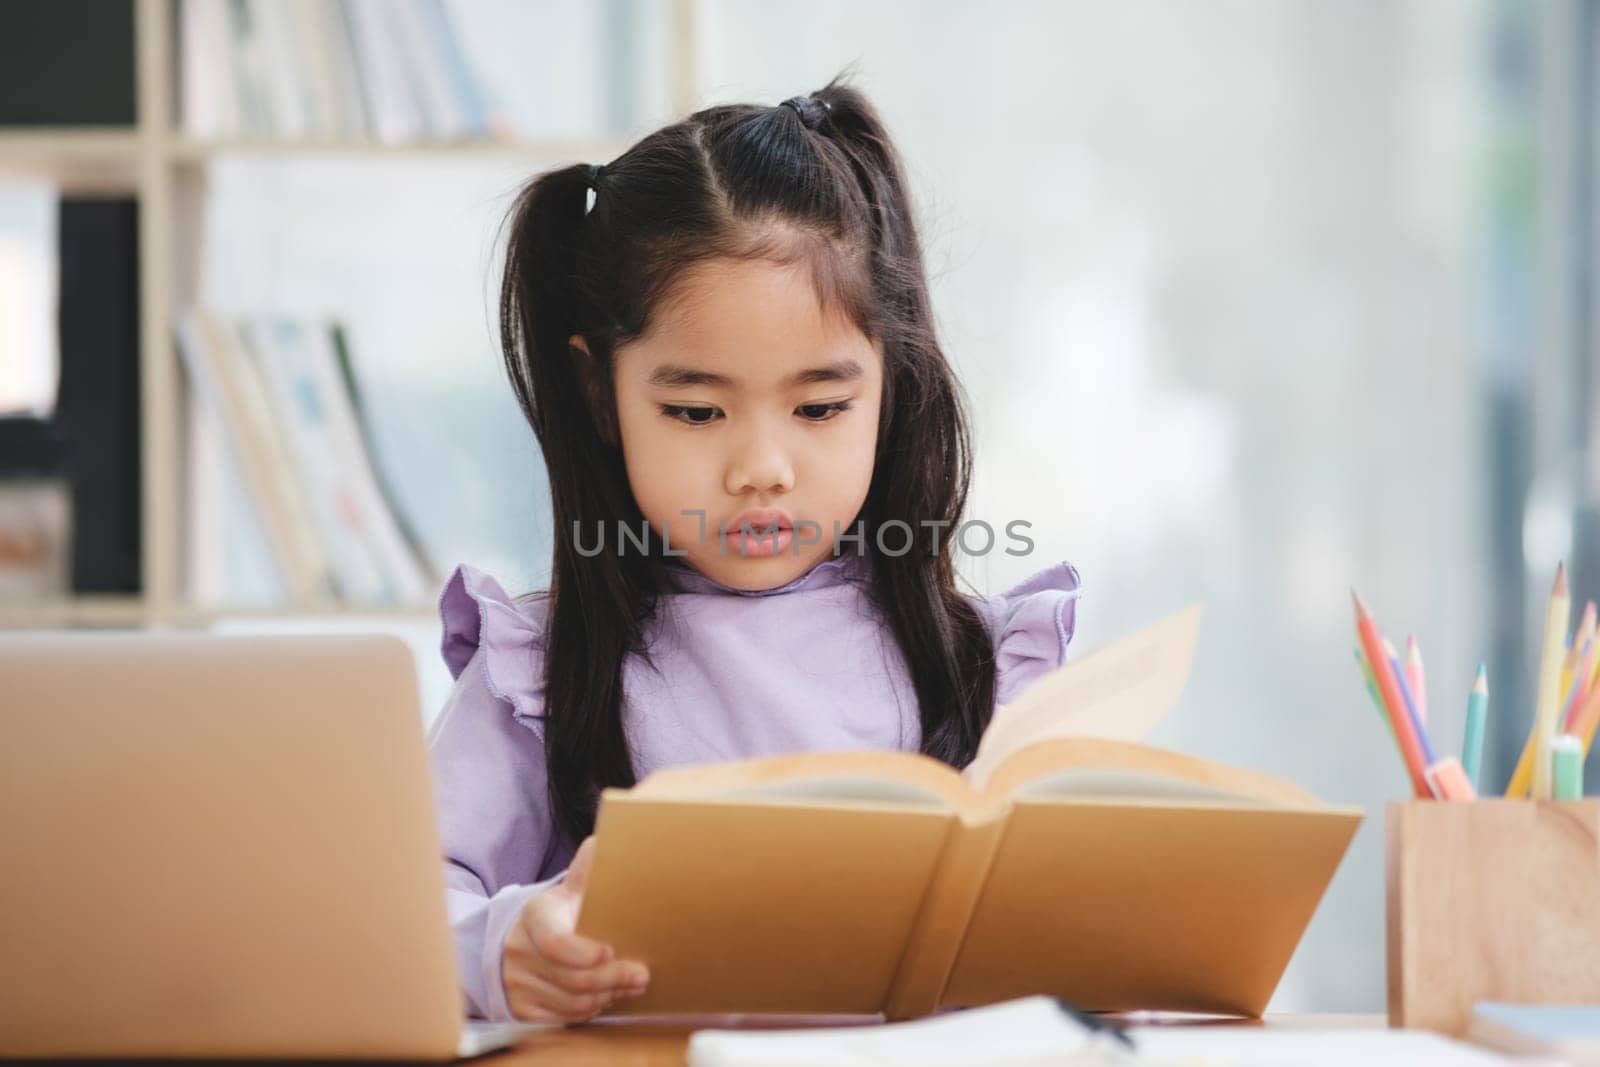 A young girl is sitting at a desk reading a book. She is wearing a purple shirt and has her hair in pigtails. The scene is set in a library or a classroom, with a laptop and a pencil on the desk